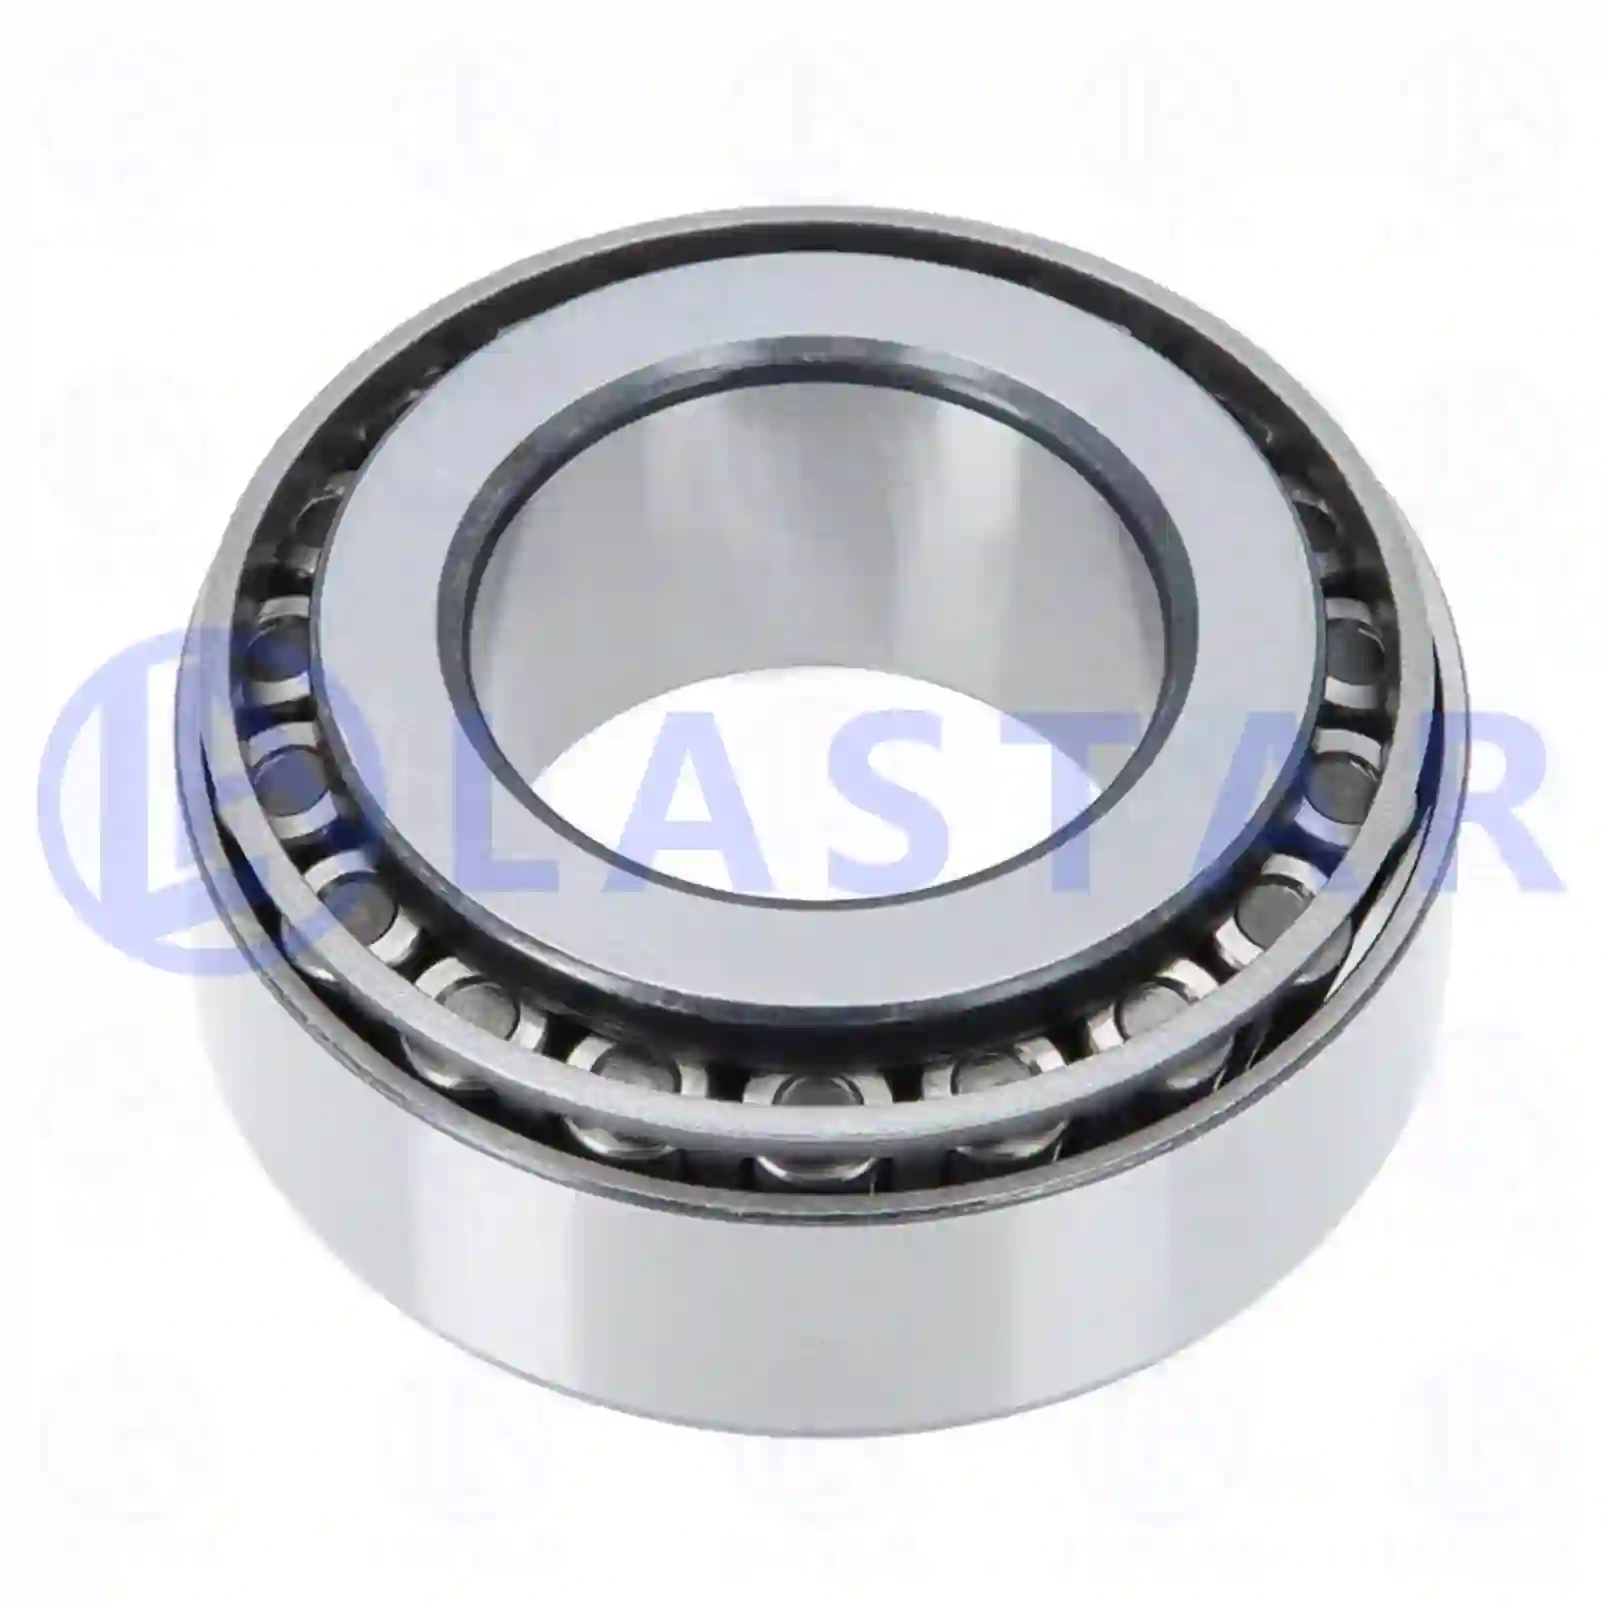 Bearings Tapered roller bearing, la no: 77725223 ,  oem no:0264074500, 0264074501, 636820, 06324890003, 06324890044, 81934200078, 0039815305, 0039815705, 0049817205, 0059814105, 5010439060, 7421094007, 4200006300, 21094007 Lastar Spare Part | Truck Spare Parts, Auotomotive Spare Parts